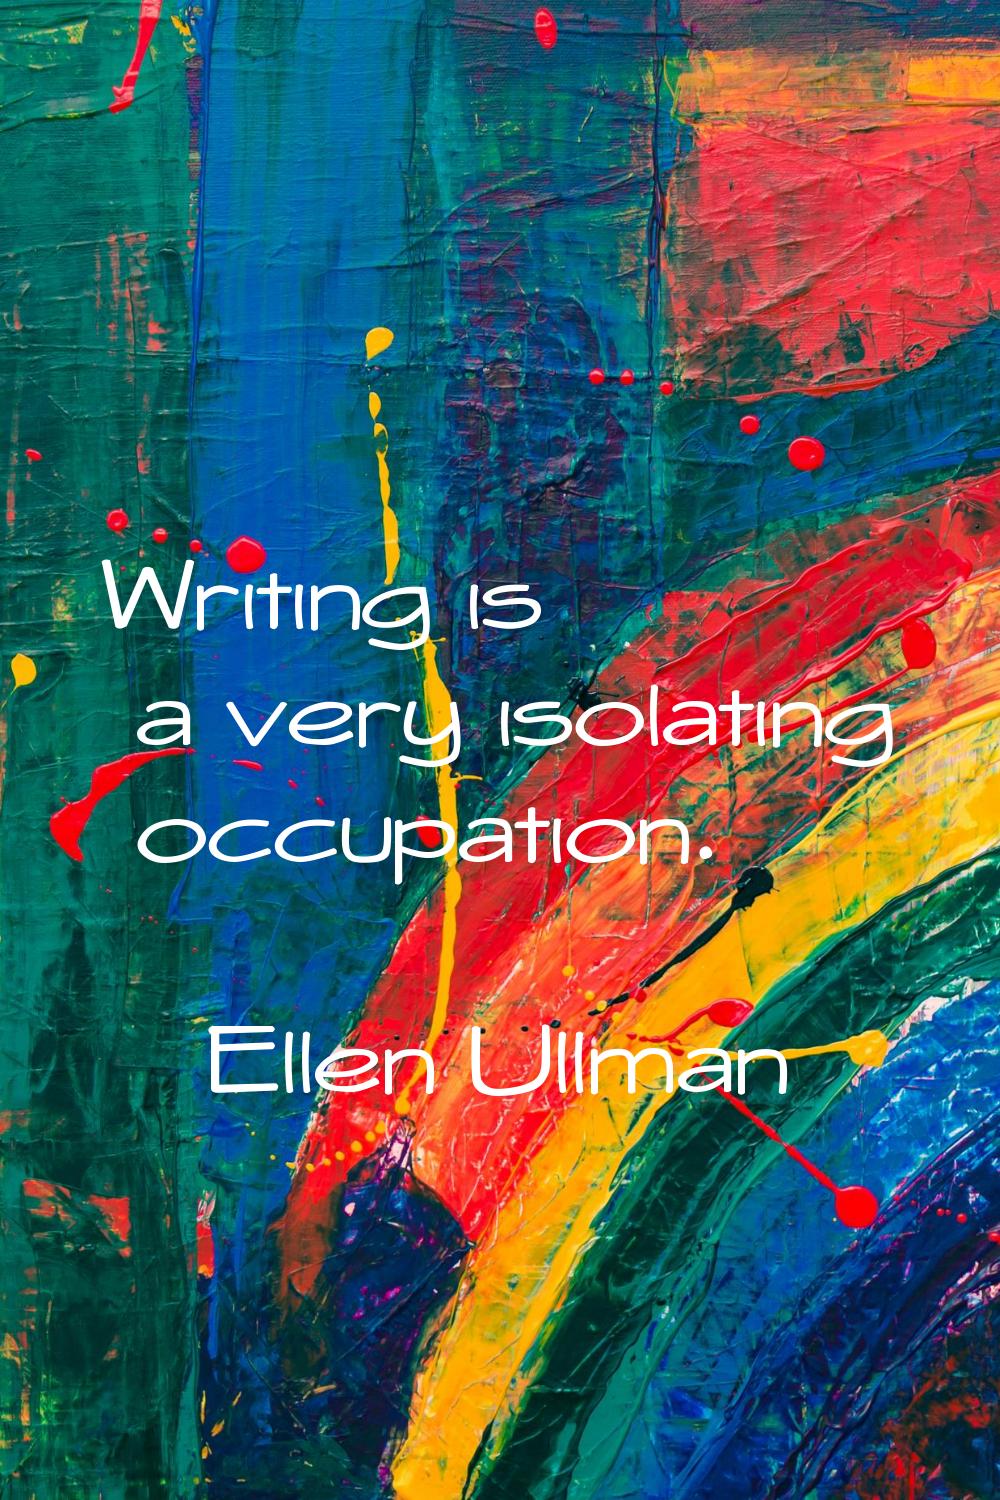 Writing is a very isolating occupation.